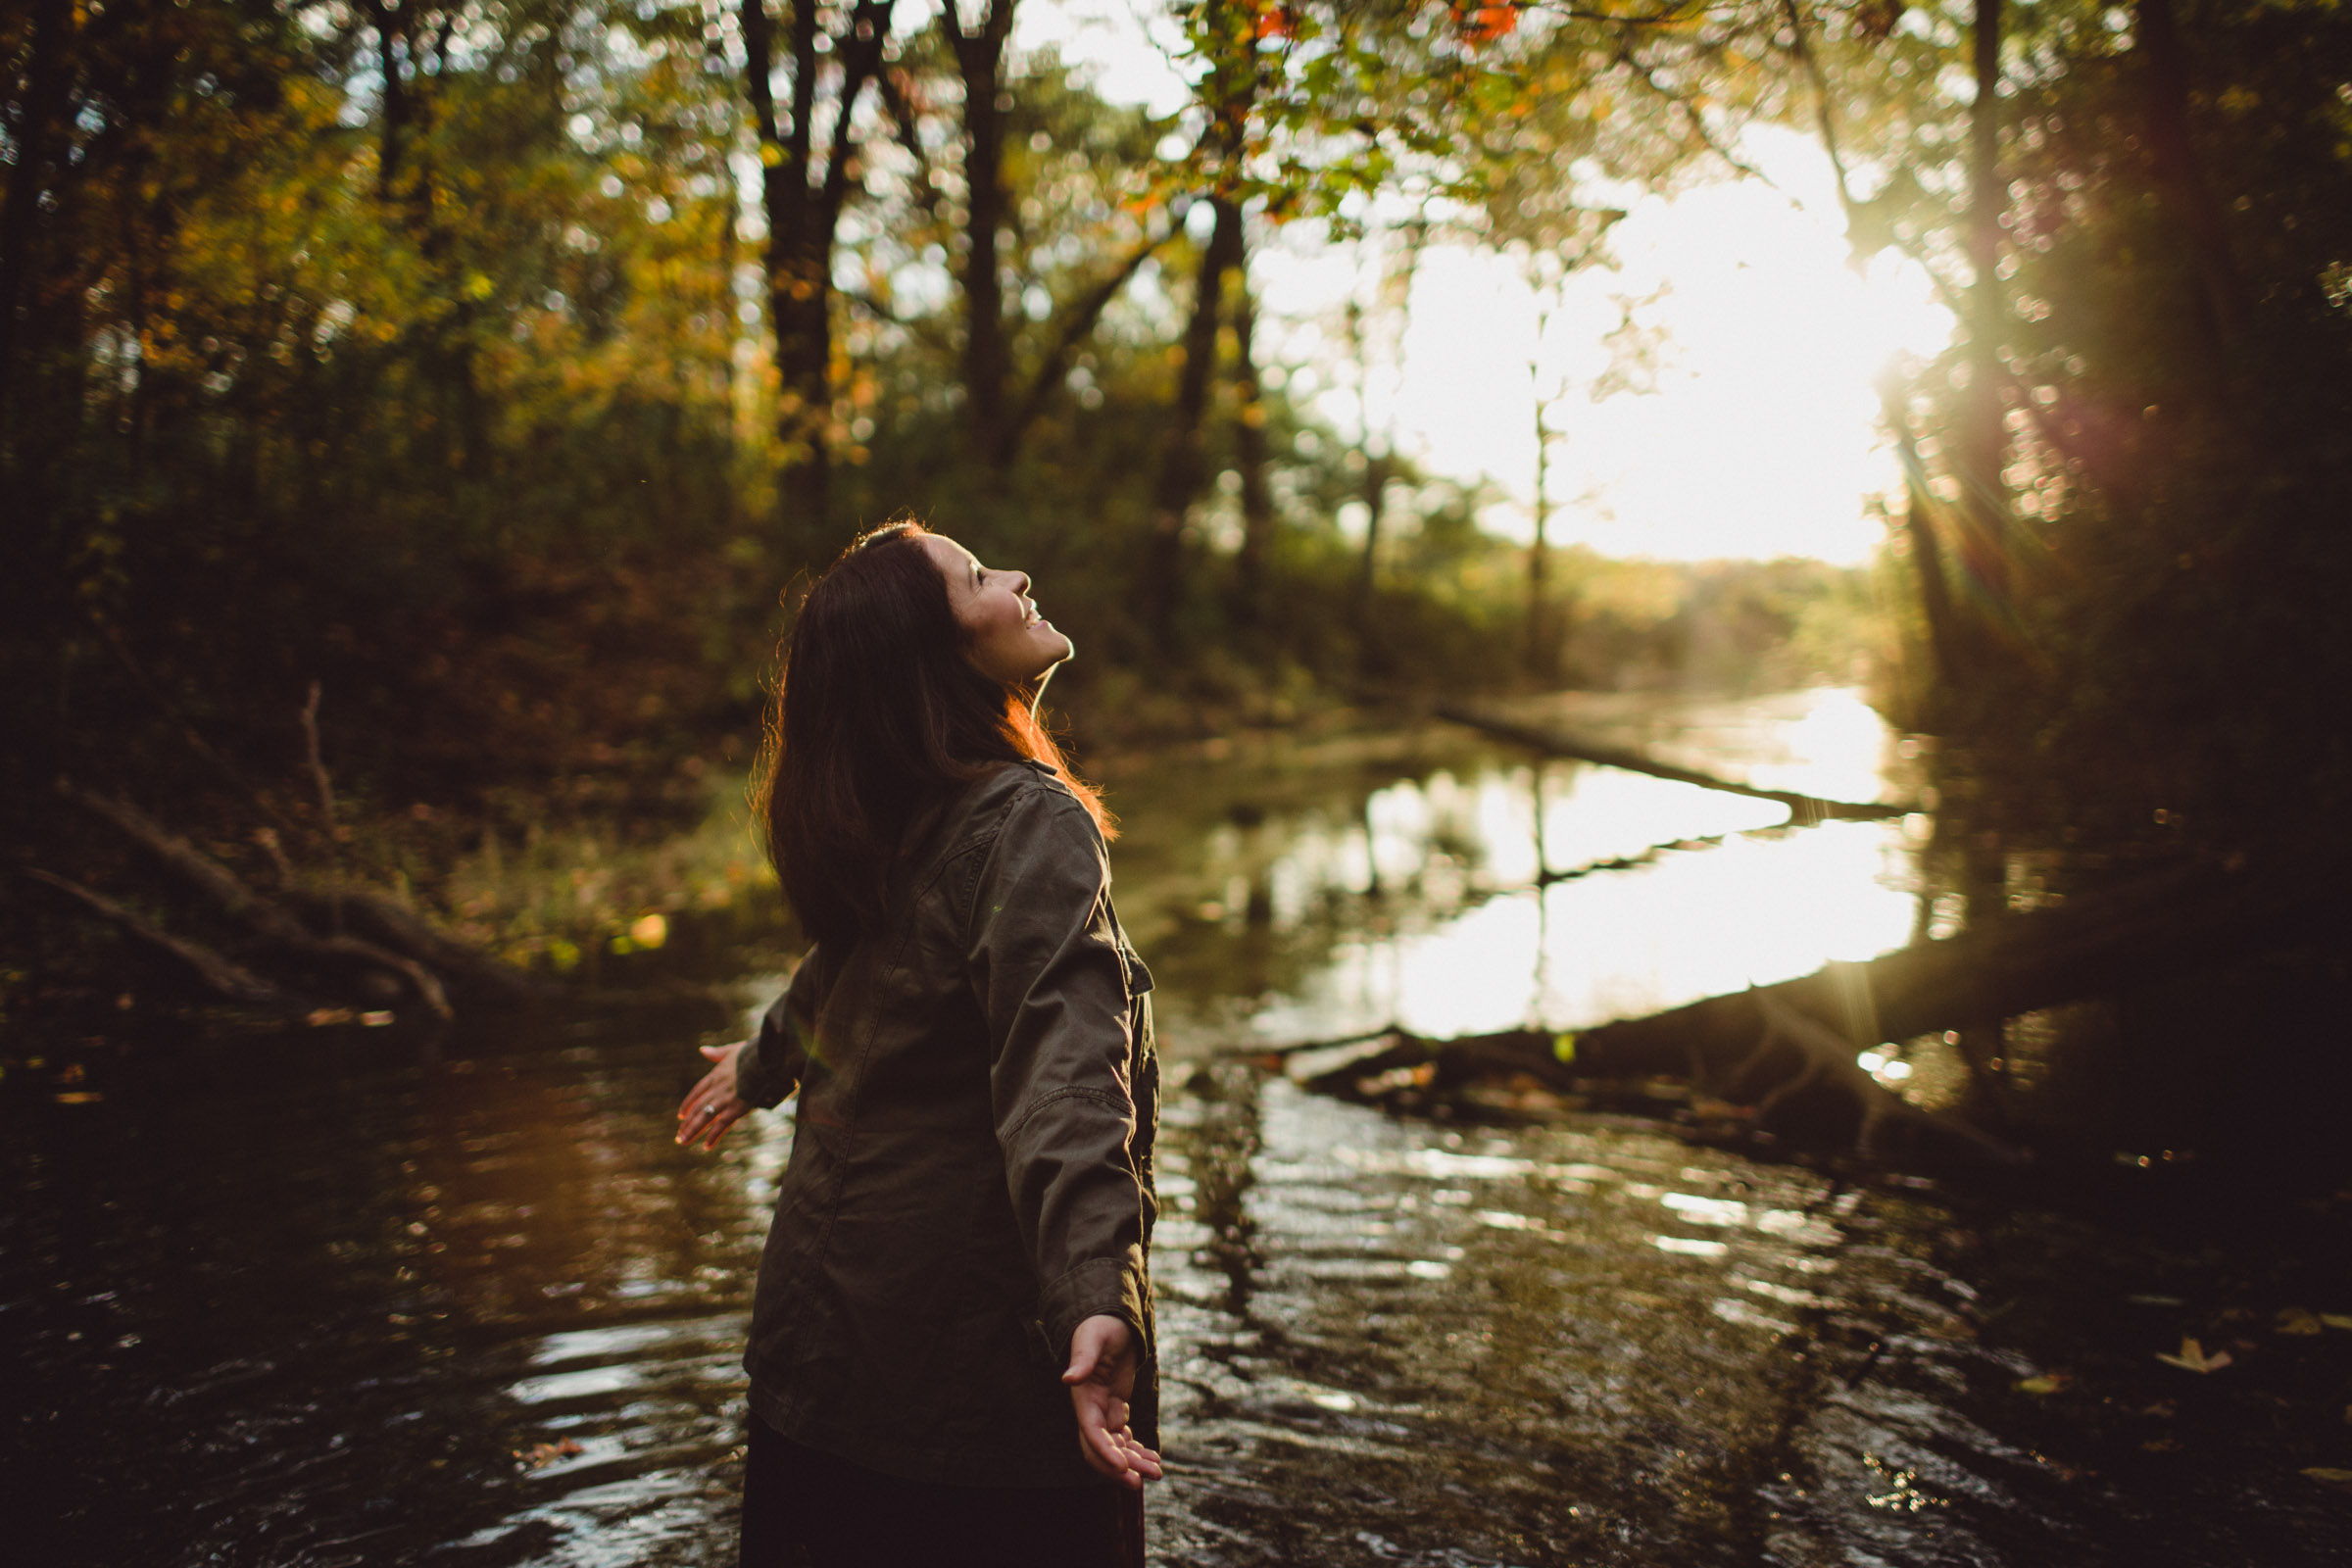 soaking in the joy and sunshine, eyes focused on the light above, girl in creek waters 